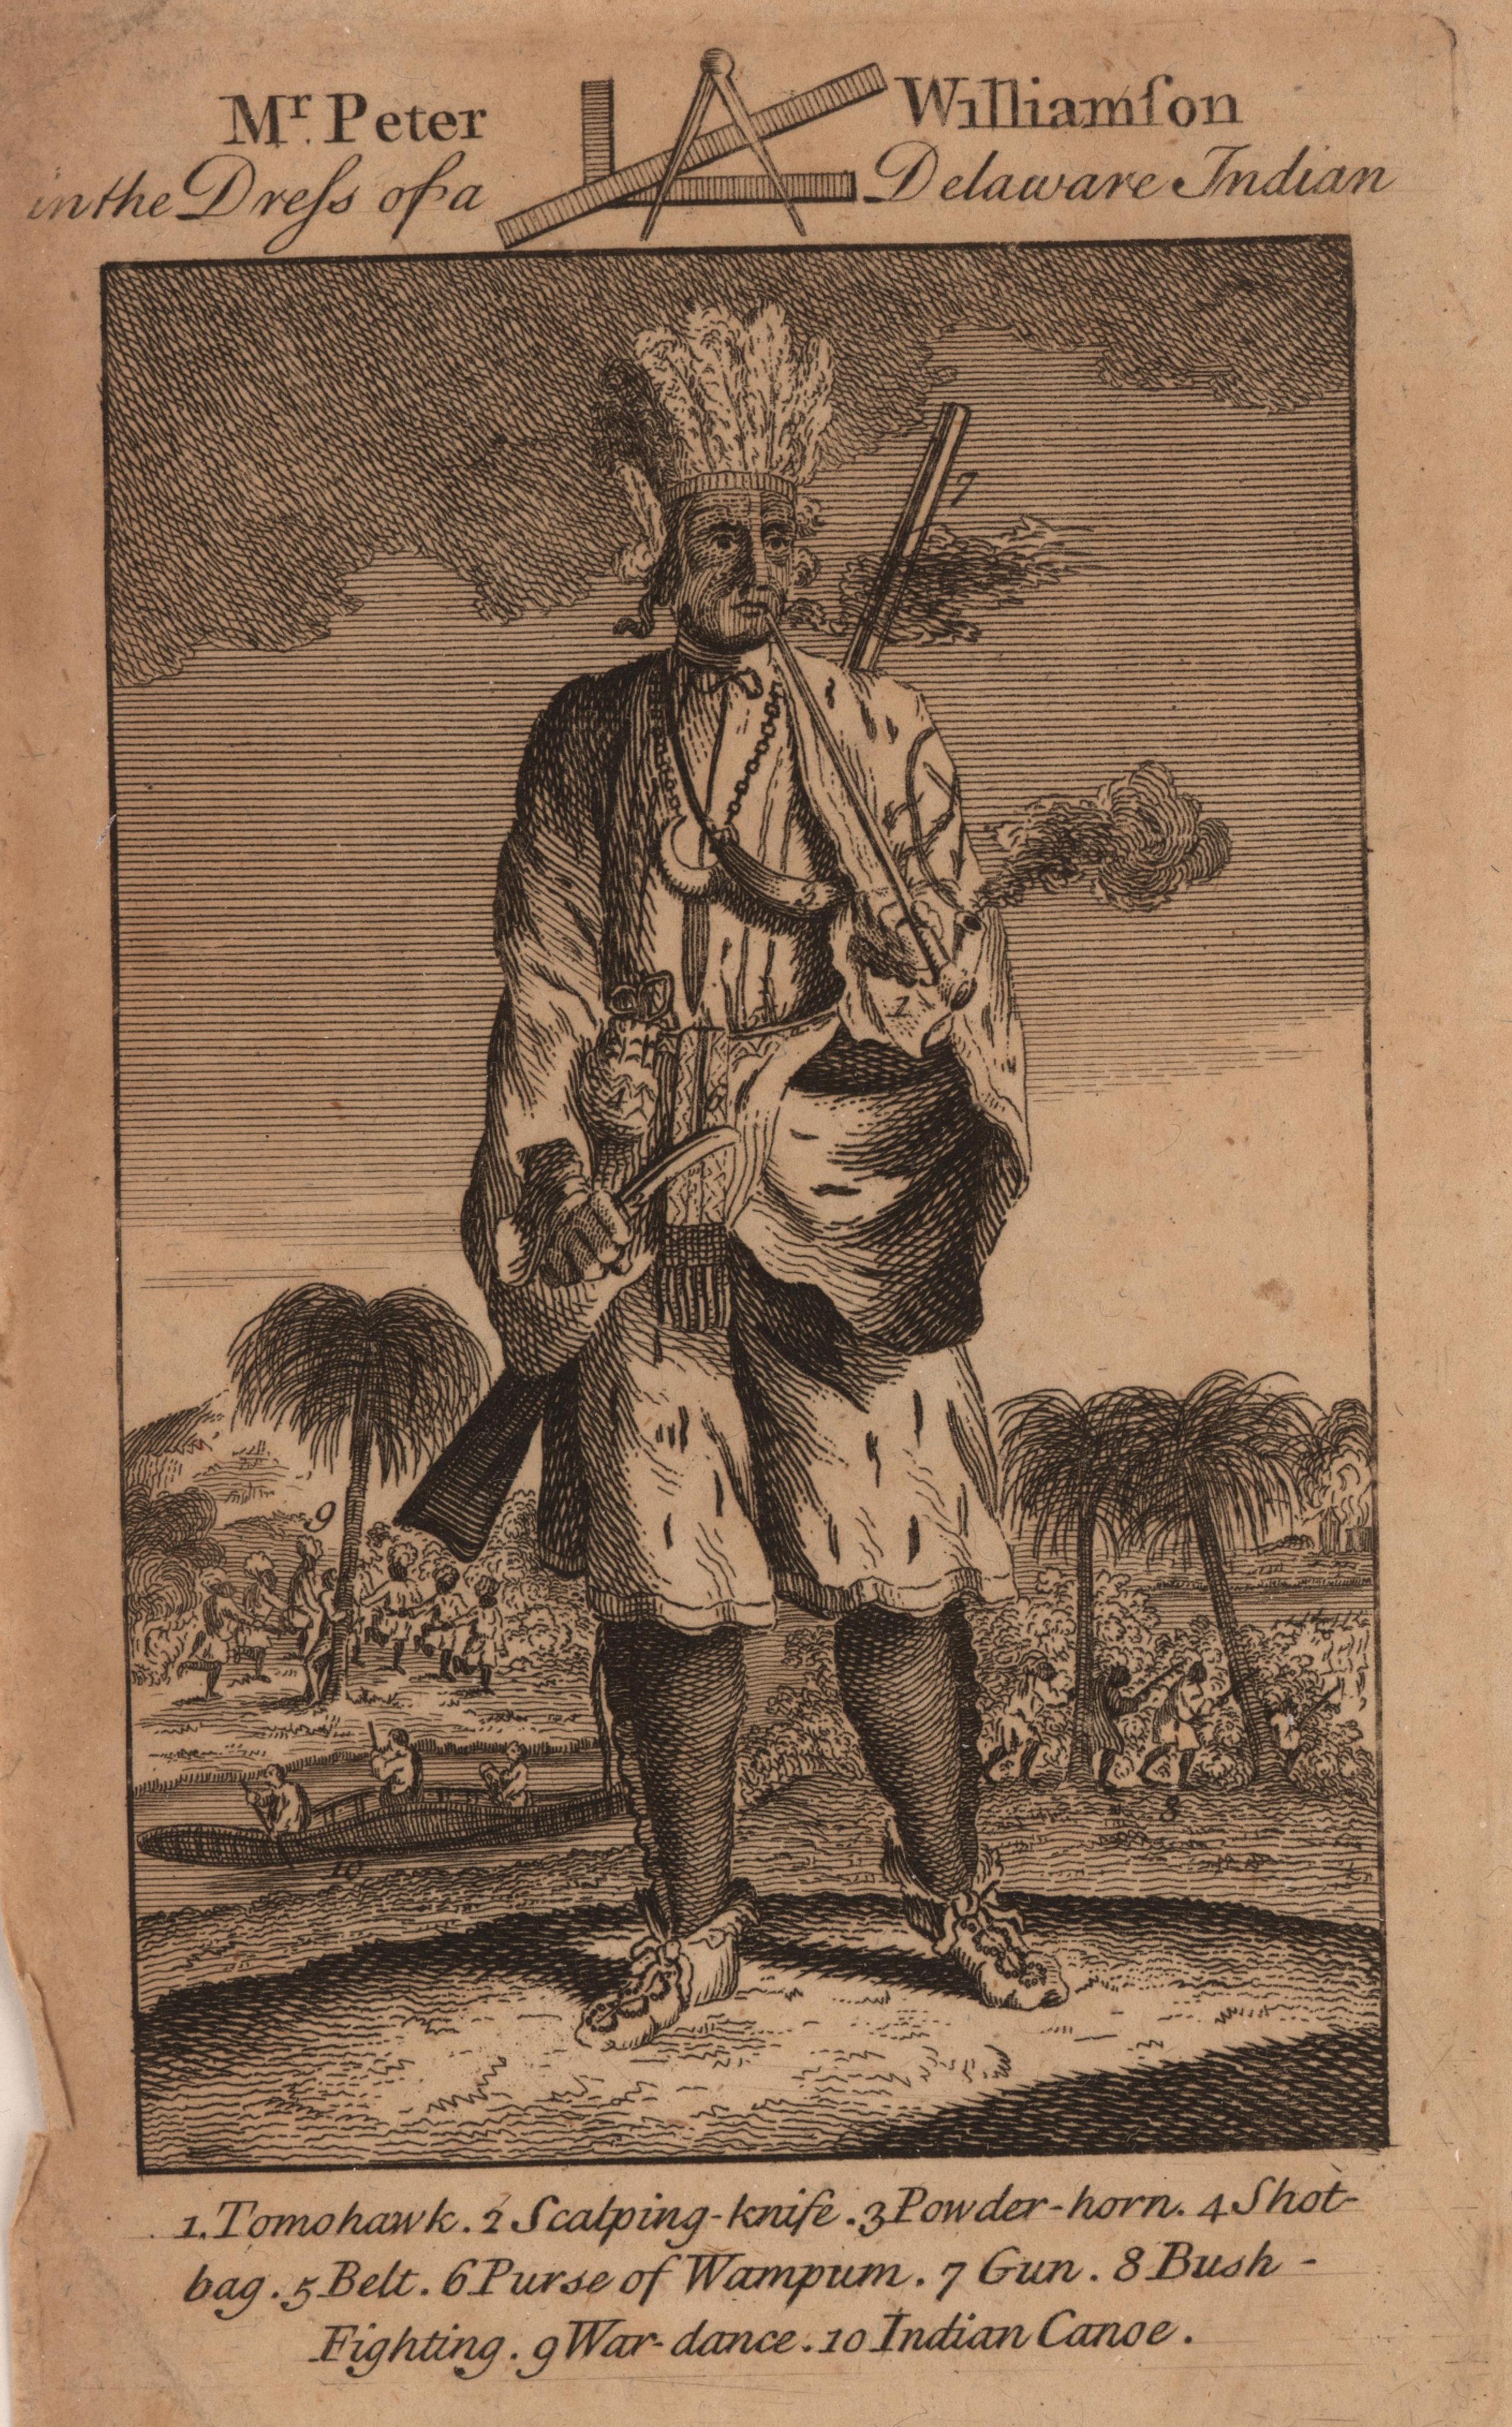 Portrait of a European colonist dressed as member of the Delaware tribe